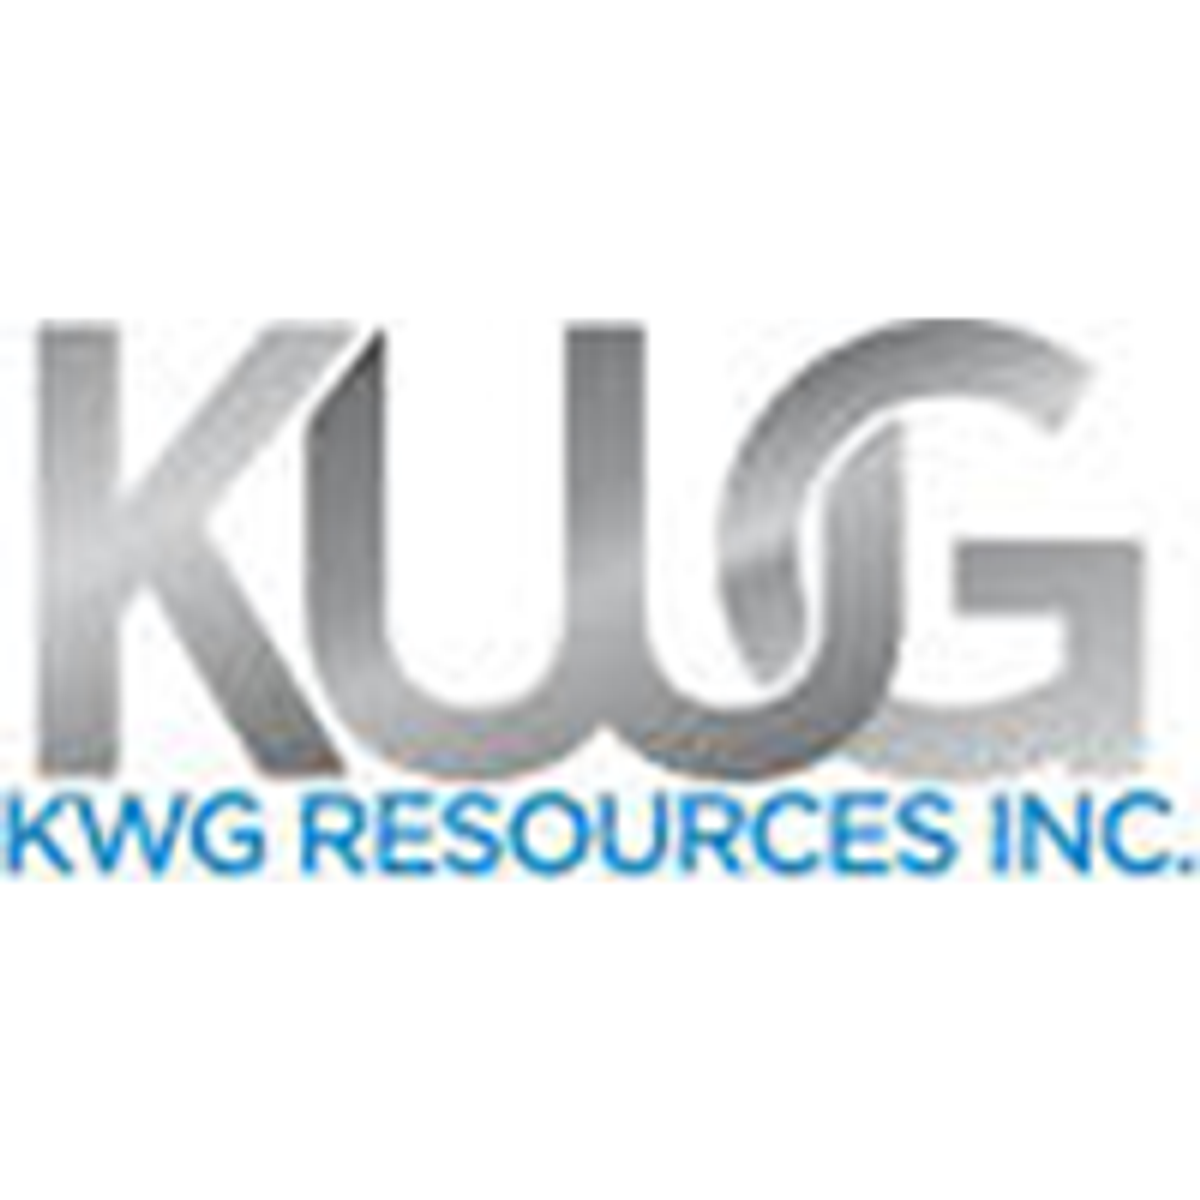 KWG Gives Notice to Convert $6.6 Million of Series 2021 Convertible Debentures into Shares and Warrants